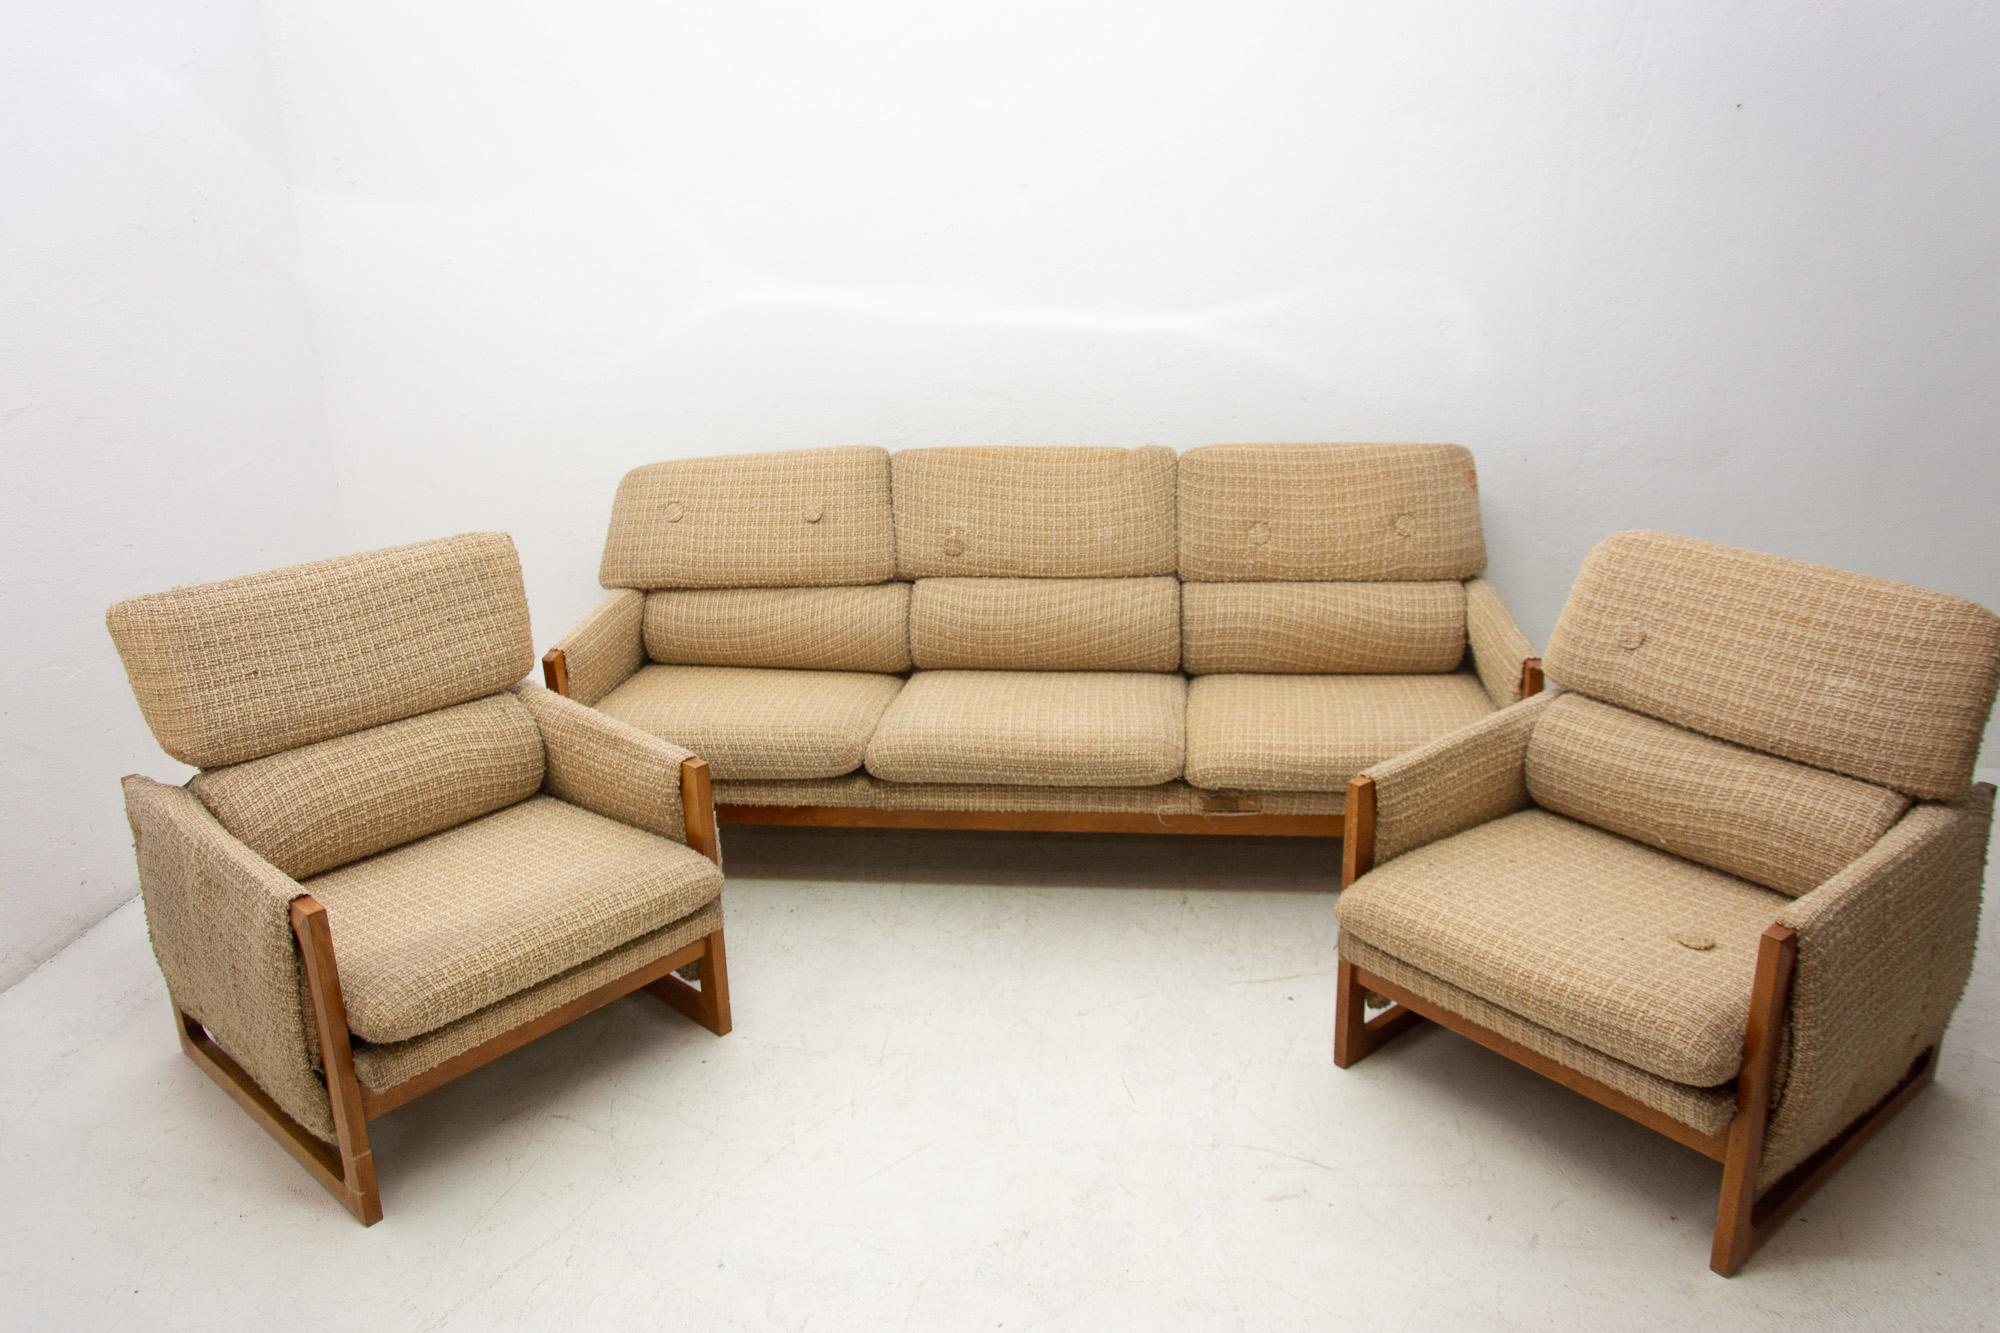 This lounge seating group was made in the 1980s in the former Czechoslovakia. Consists of one sofa and two armchairs. The set is upholstered in fabric. The structure is probably made of pine wood. The chairs are in good Vintage condition. The sofa